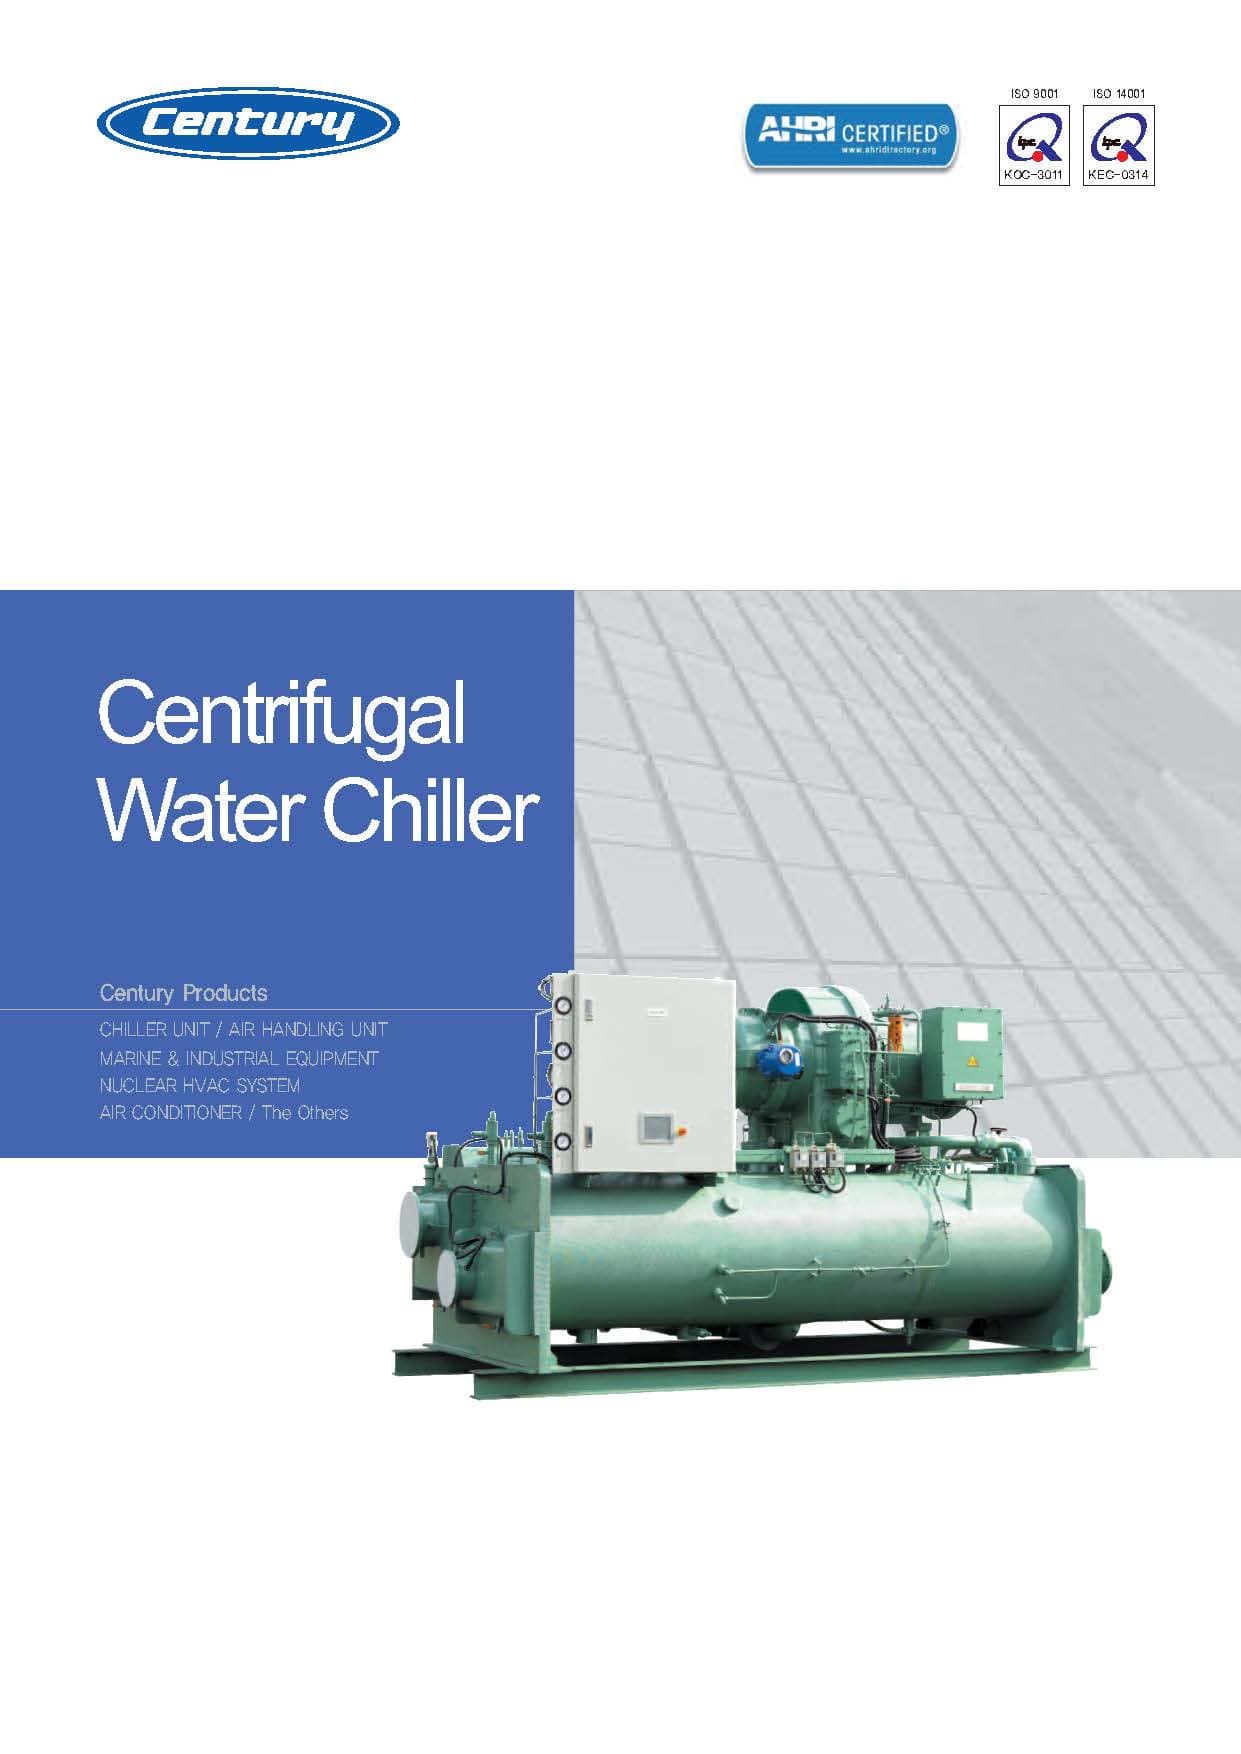 CENTRIFUGAL WATER CHILLER